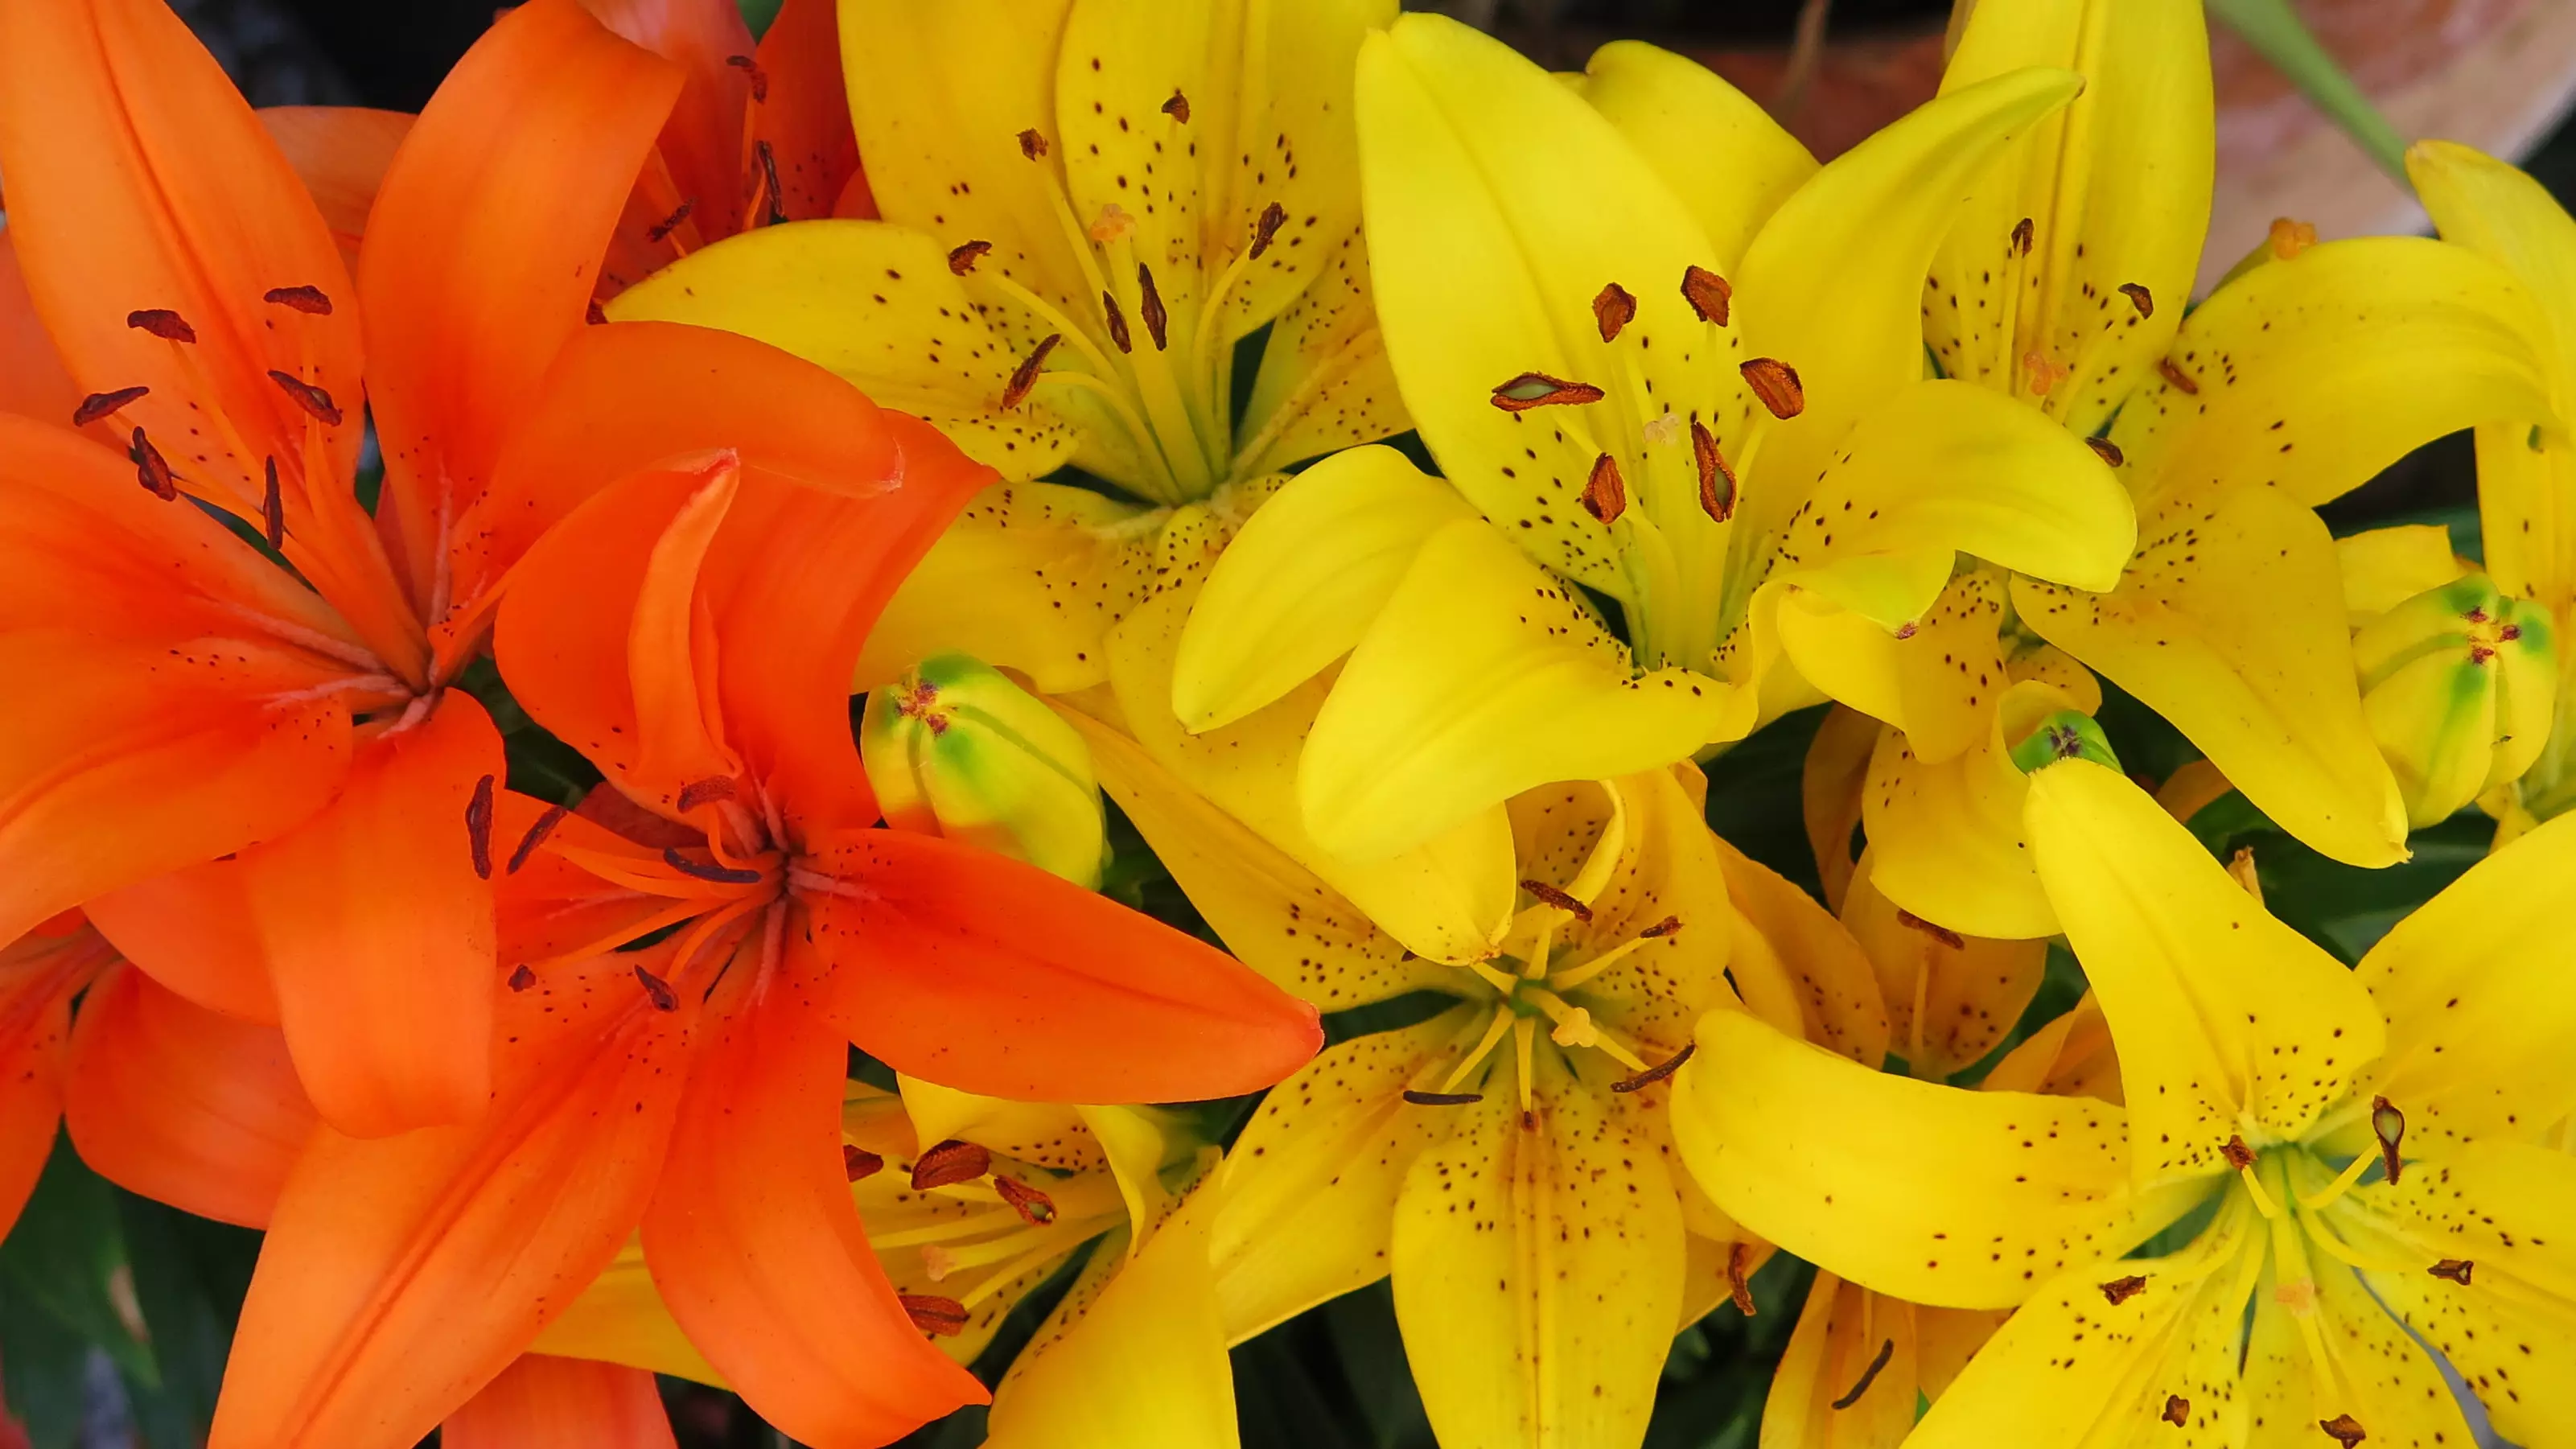 Lilies are extremely poisonous to cats (